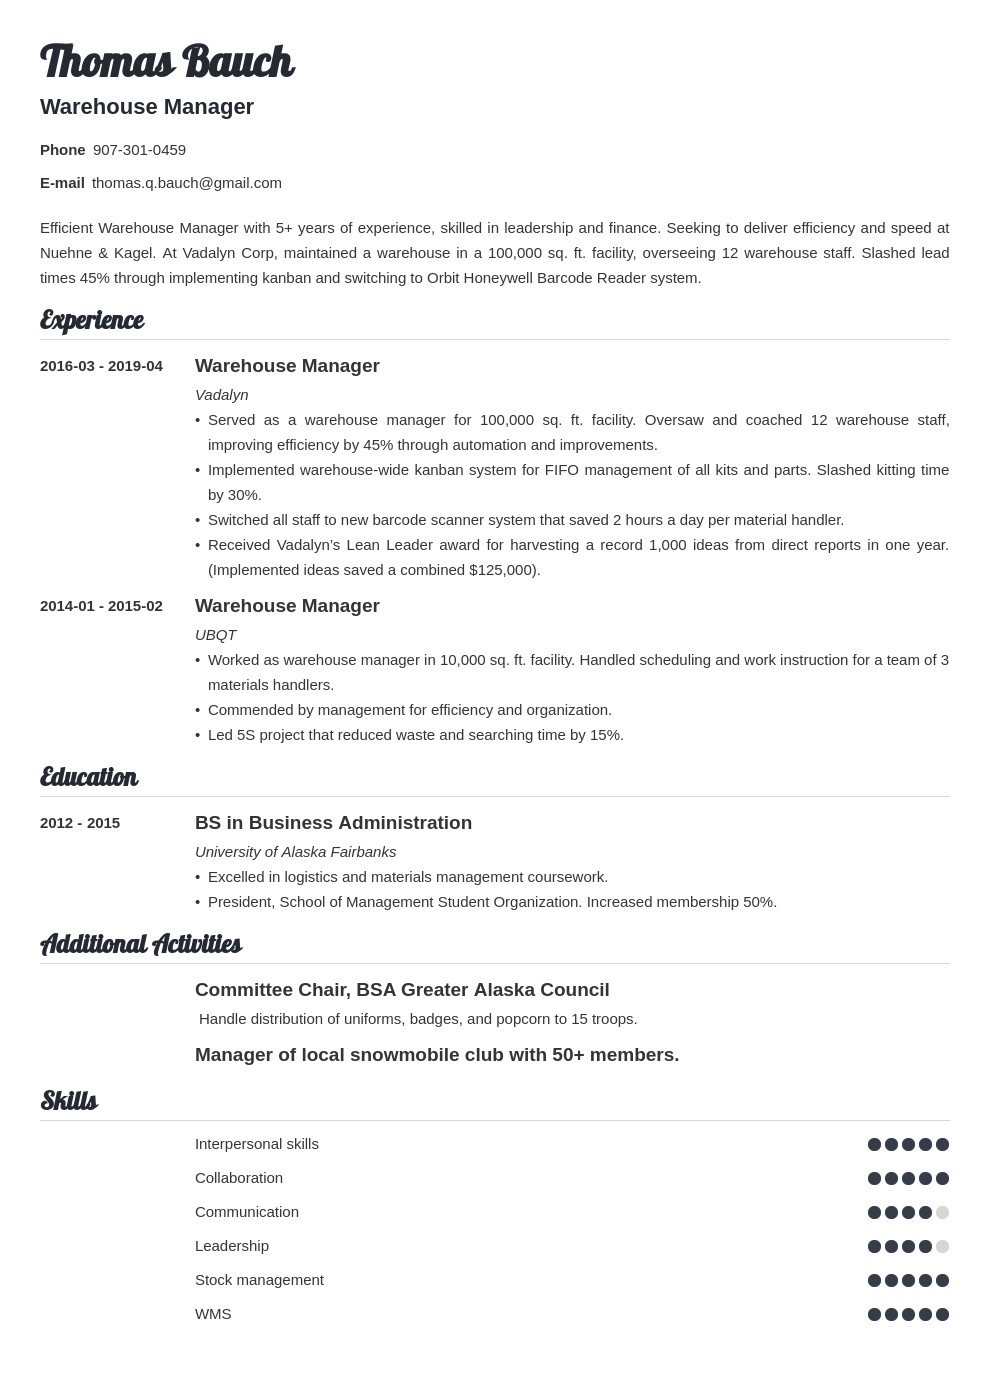 Sample Resume for Warehouse Manager In India Warehouse Manager Resume Sample [ Job Description]